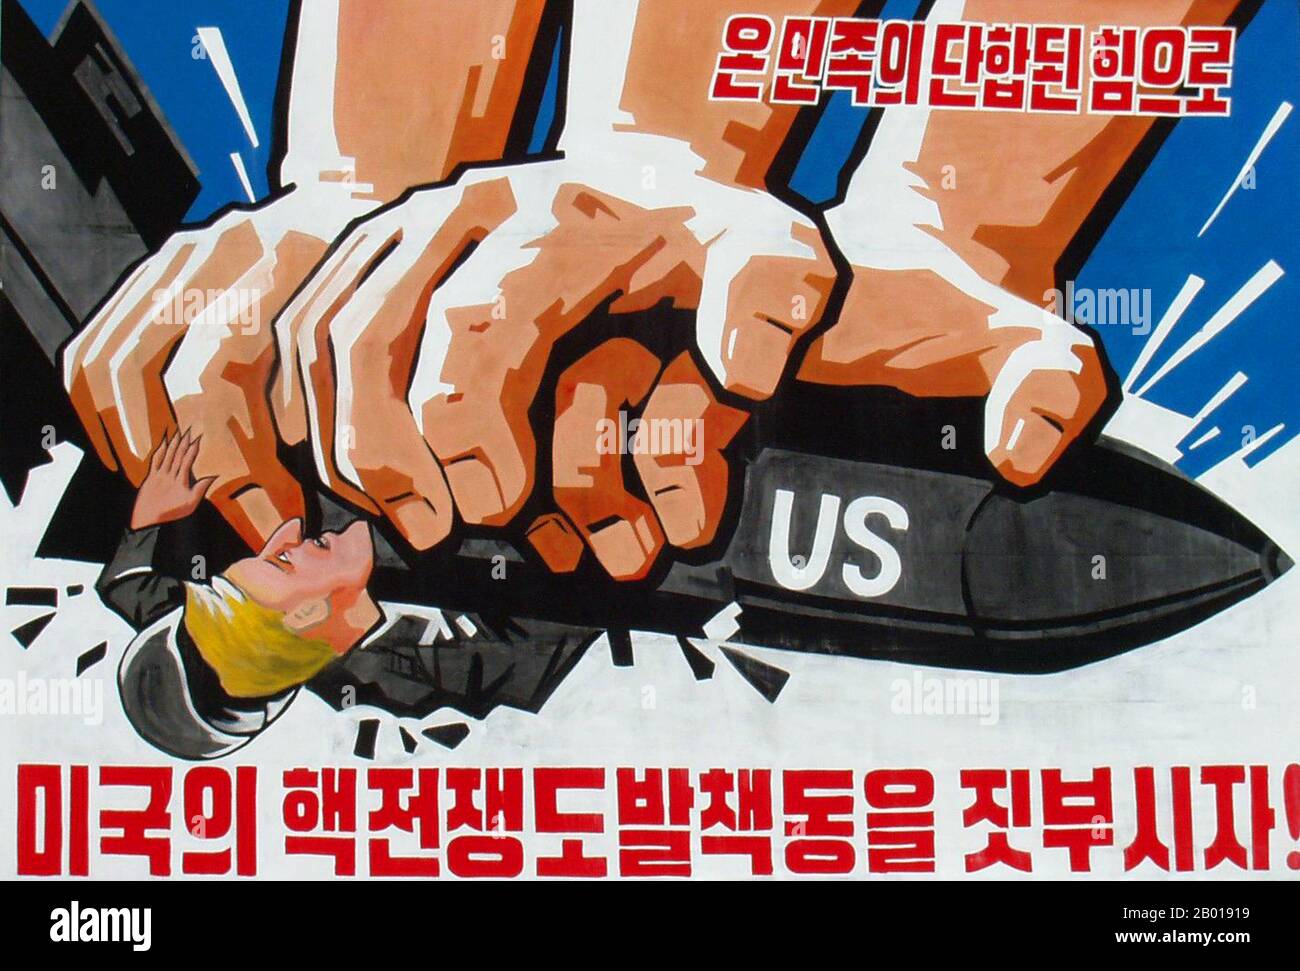 Korea: North Korean (DPRK) propaganda poster shows powerful hands crushing a militaristic USA, c. 1950s.  Socialist Realism is a style of realistic art which developed under Socialism in the Soviet Union and became a dominant style in other communist countries. Socialist Realism is a teleologically-oriented style having as its purpose the furtherance of the goals of socialism and communism. Although related, it should not be confused with Social Realism, a type of art that realistically depicts subjects of social concern. Stock Photo